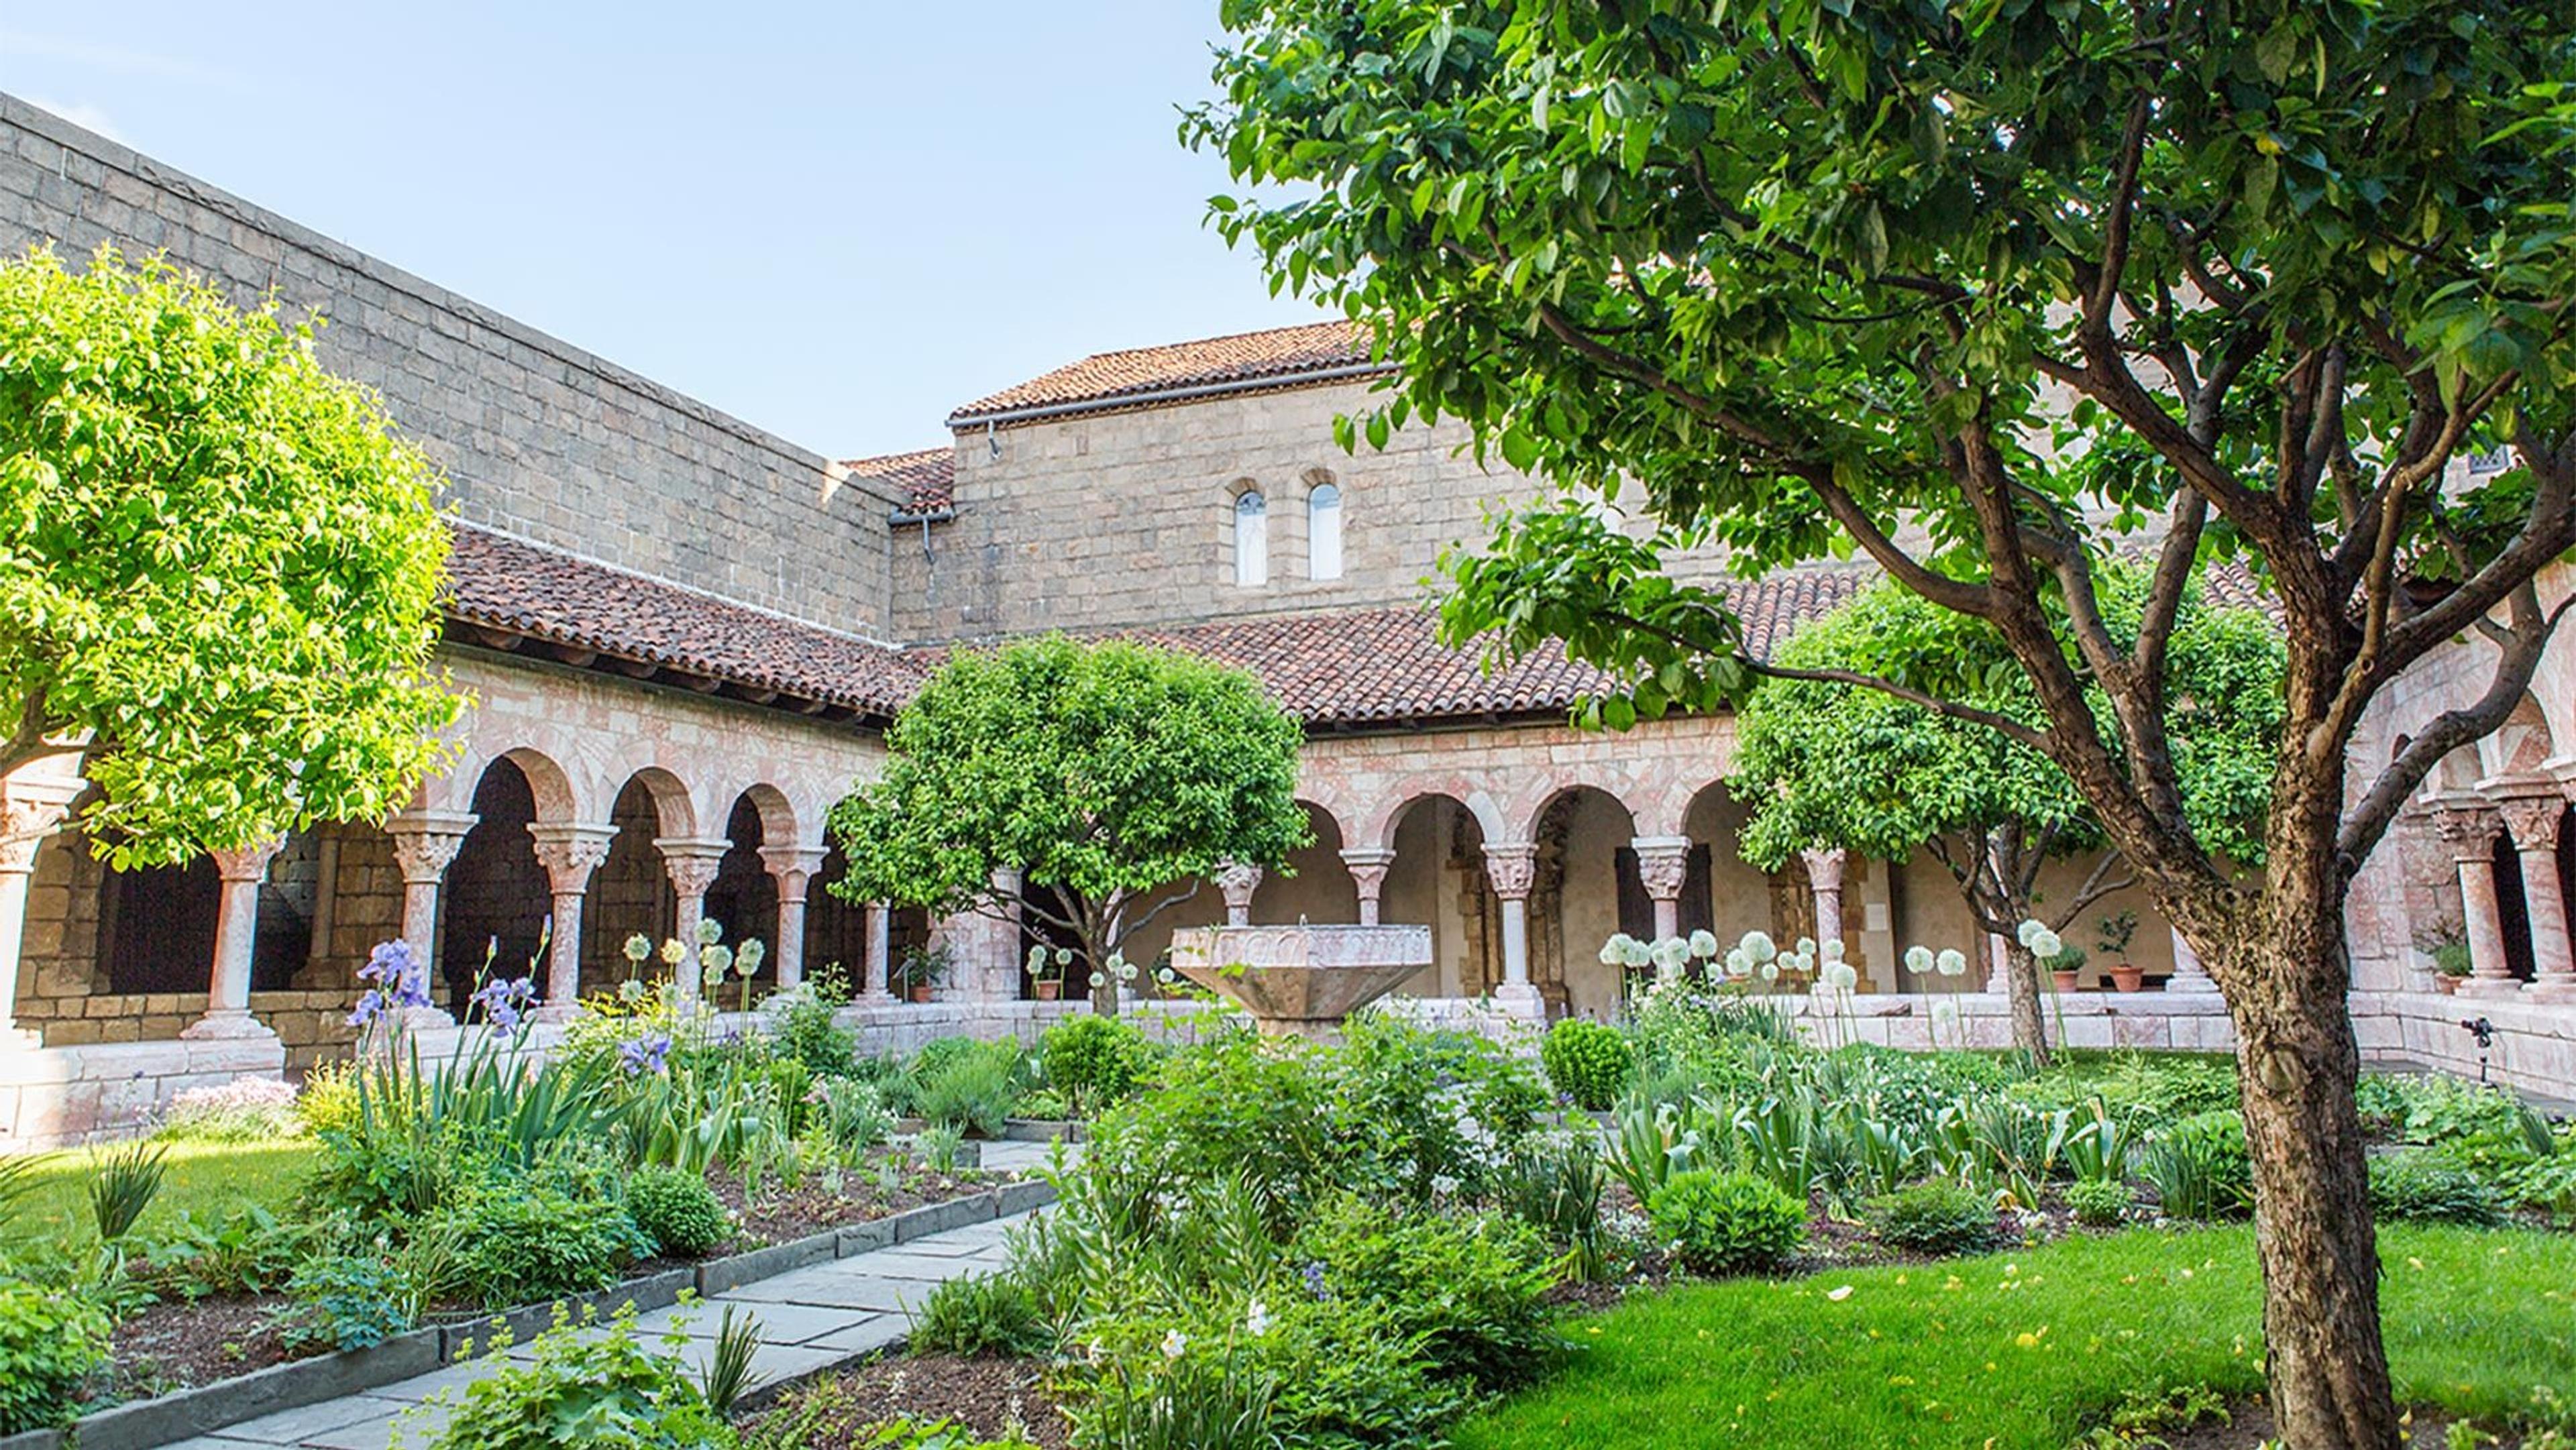 A series of archways surrounds a medieval garden